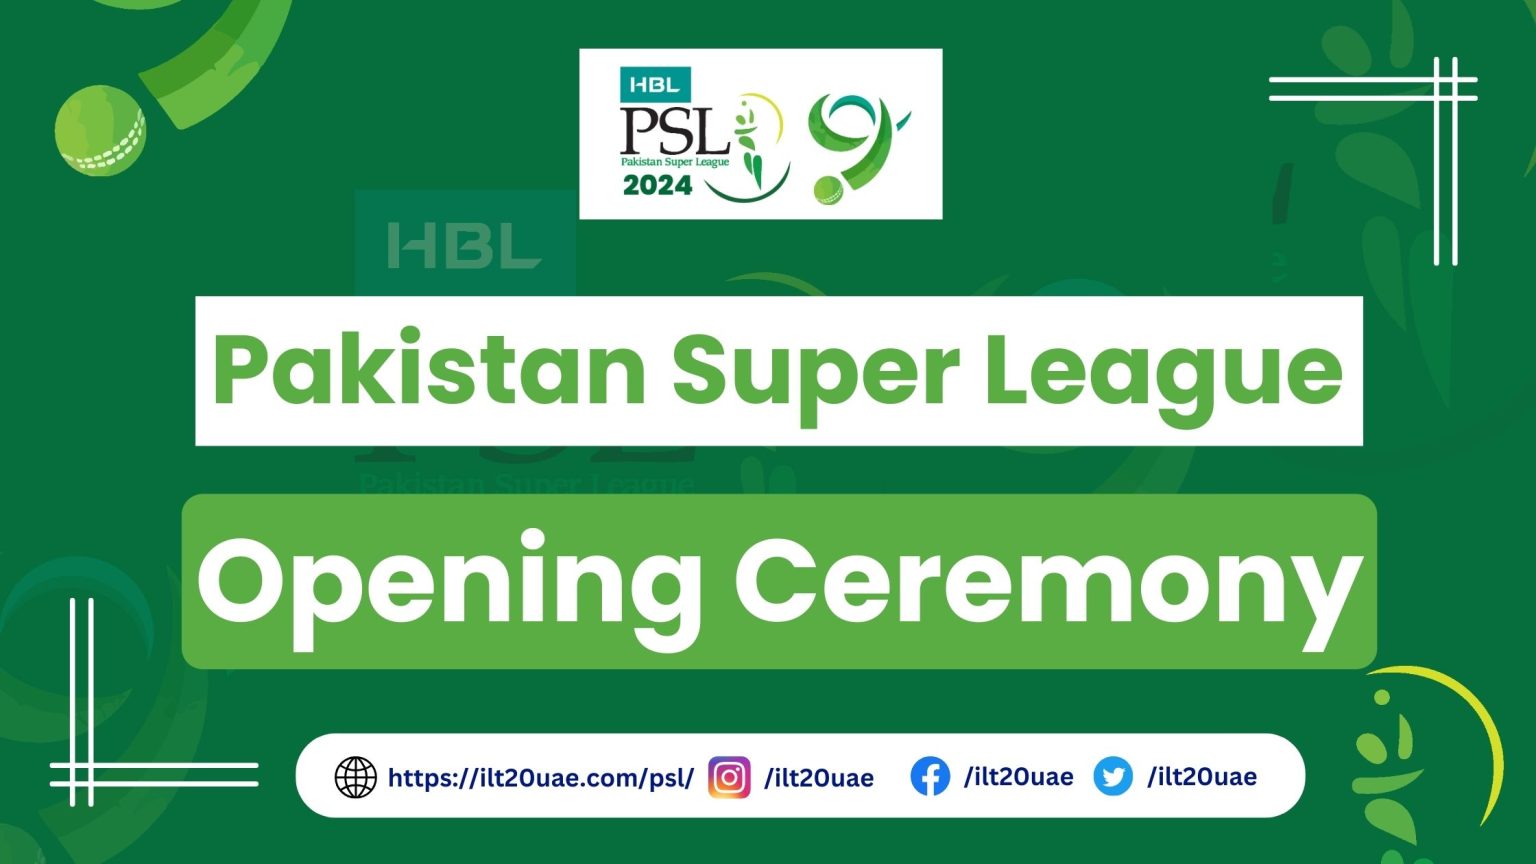 HBL PSL Opening Ceremony 2024 Who will perform? International